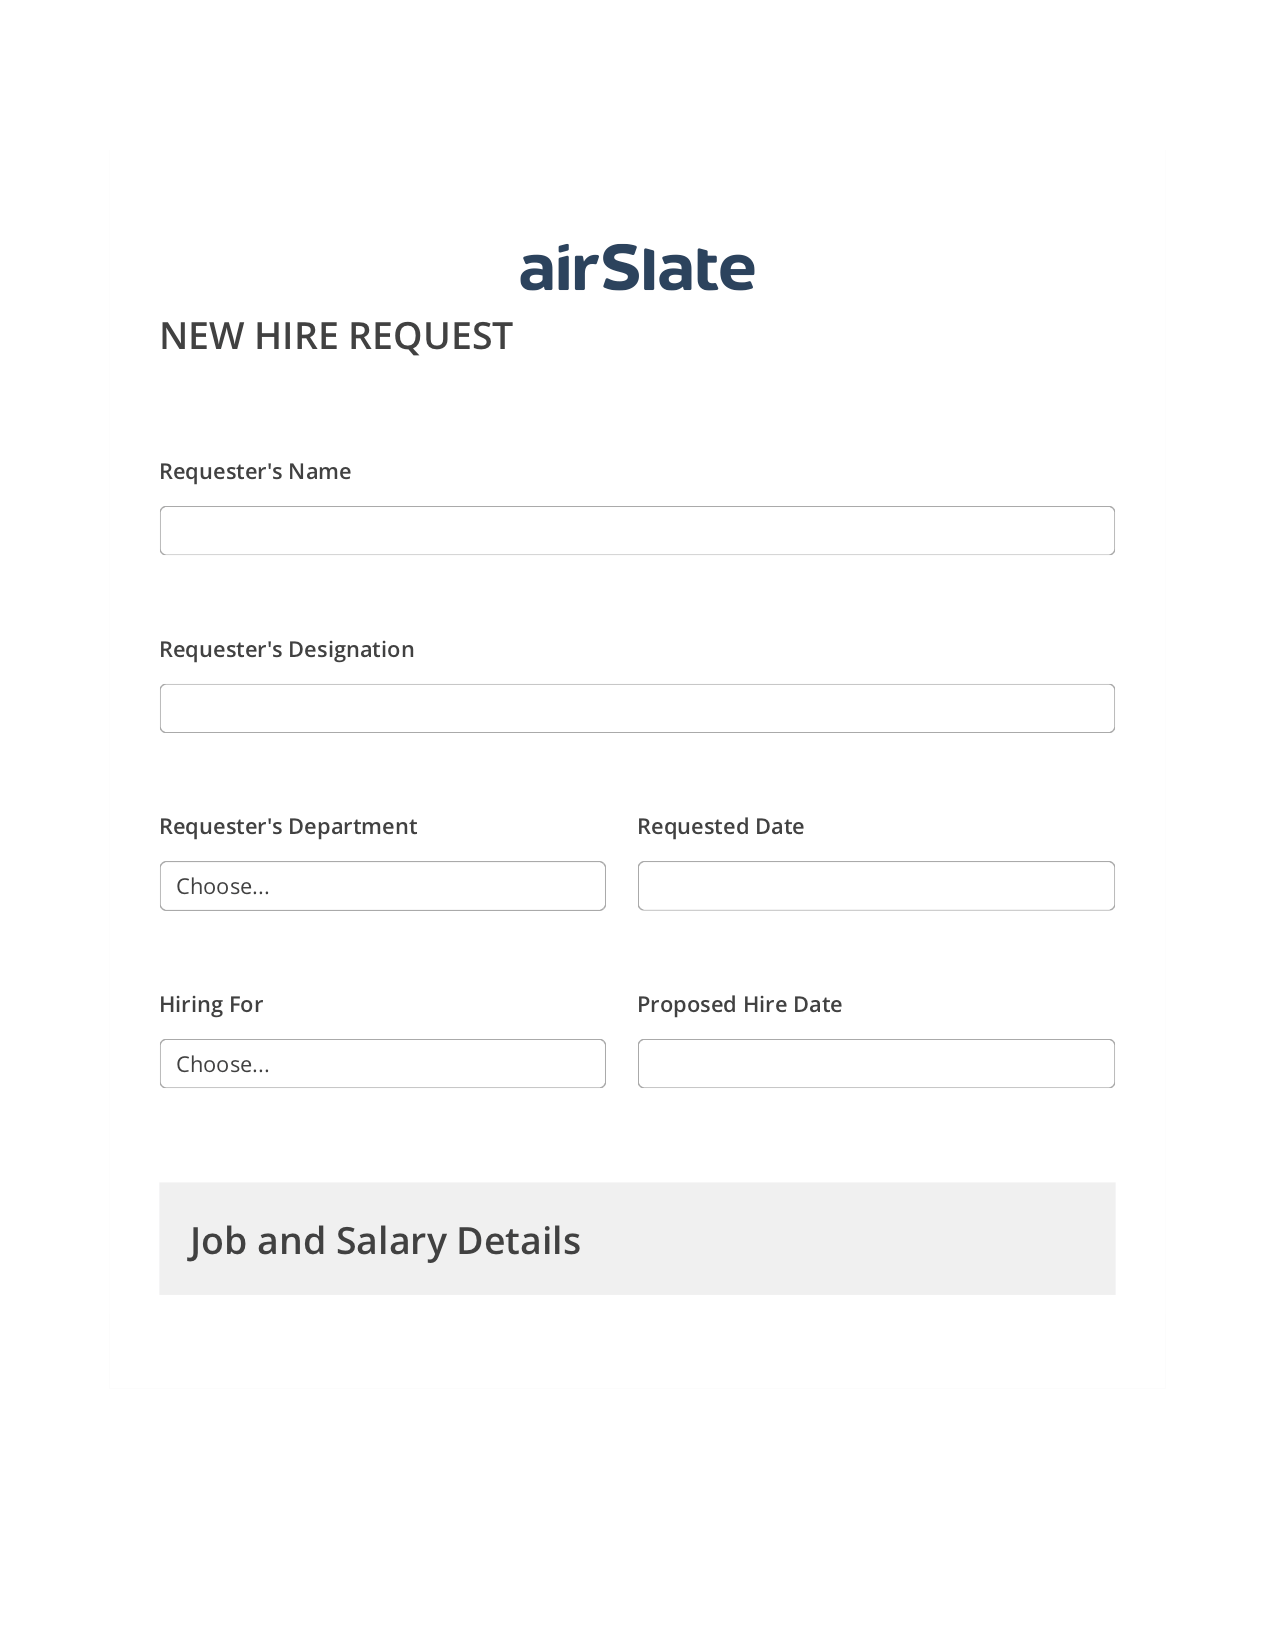 Hiring Request Workflow Pre-fill from Salesforce Records with SOQL Bot, Open under a Role Bot, Archive to Google Drive Bot